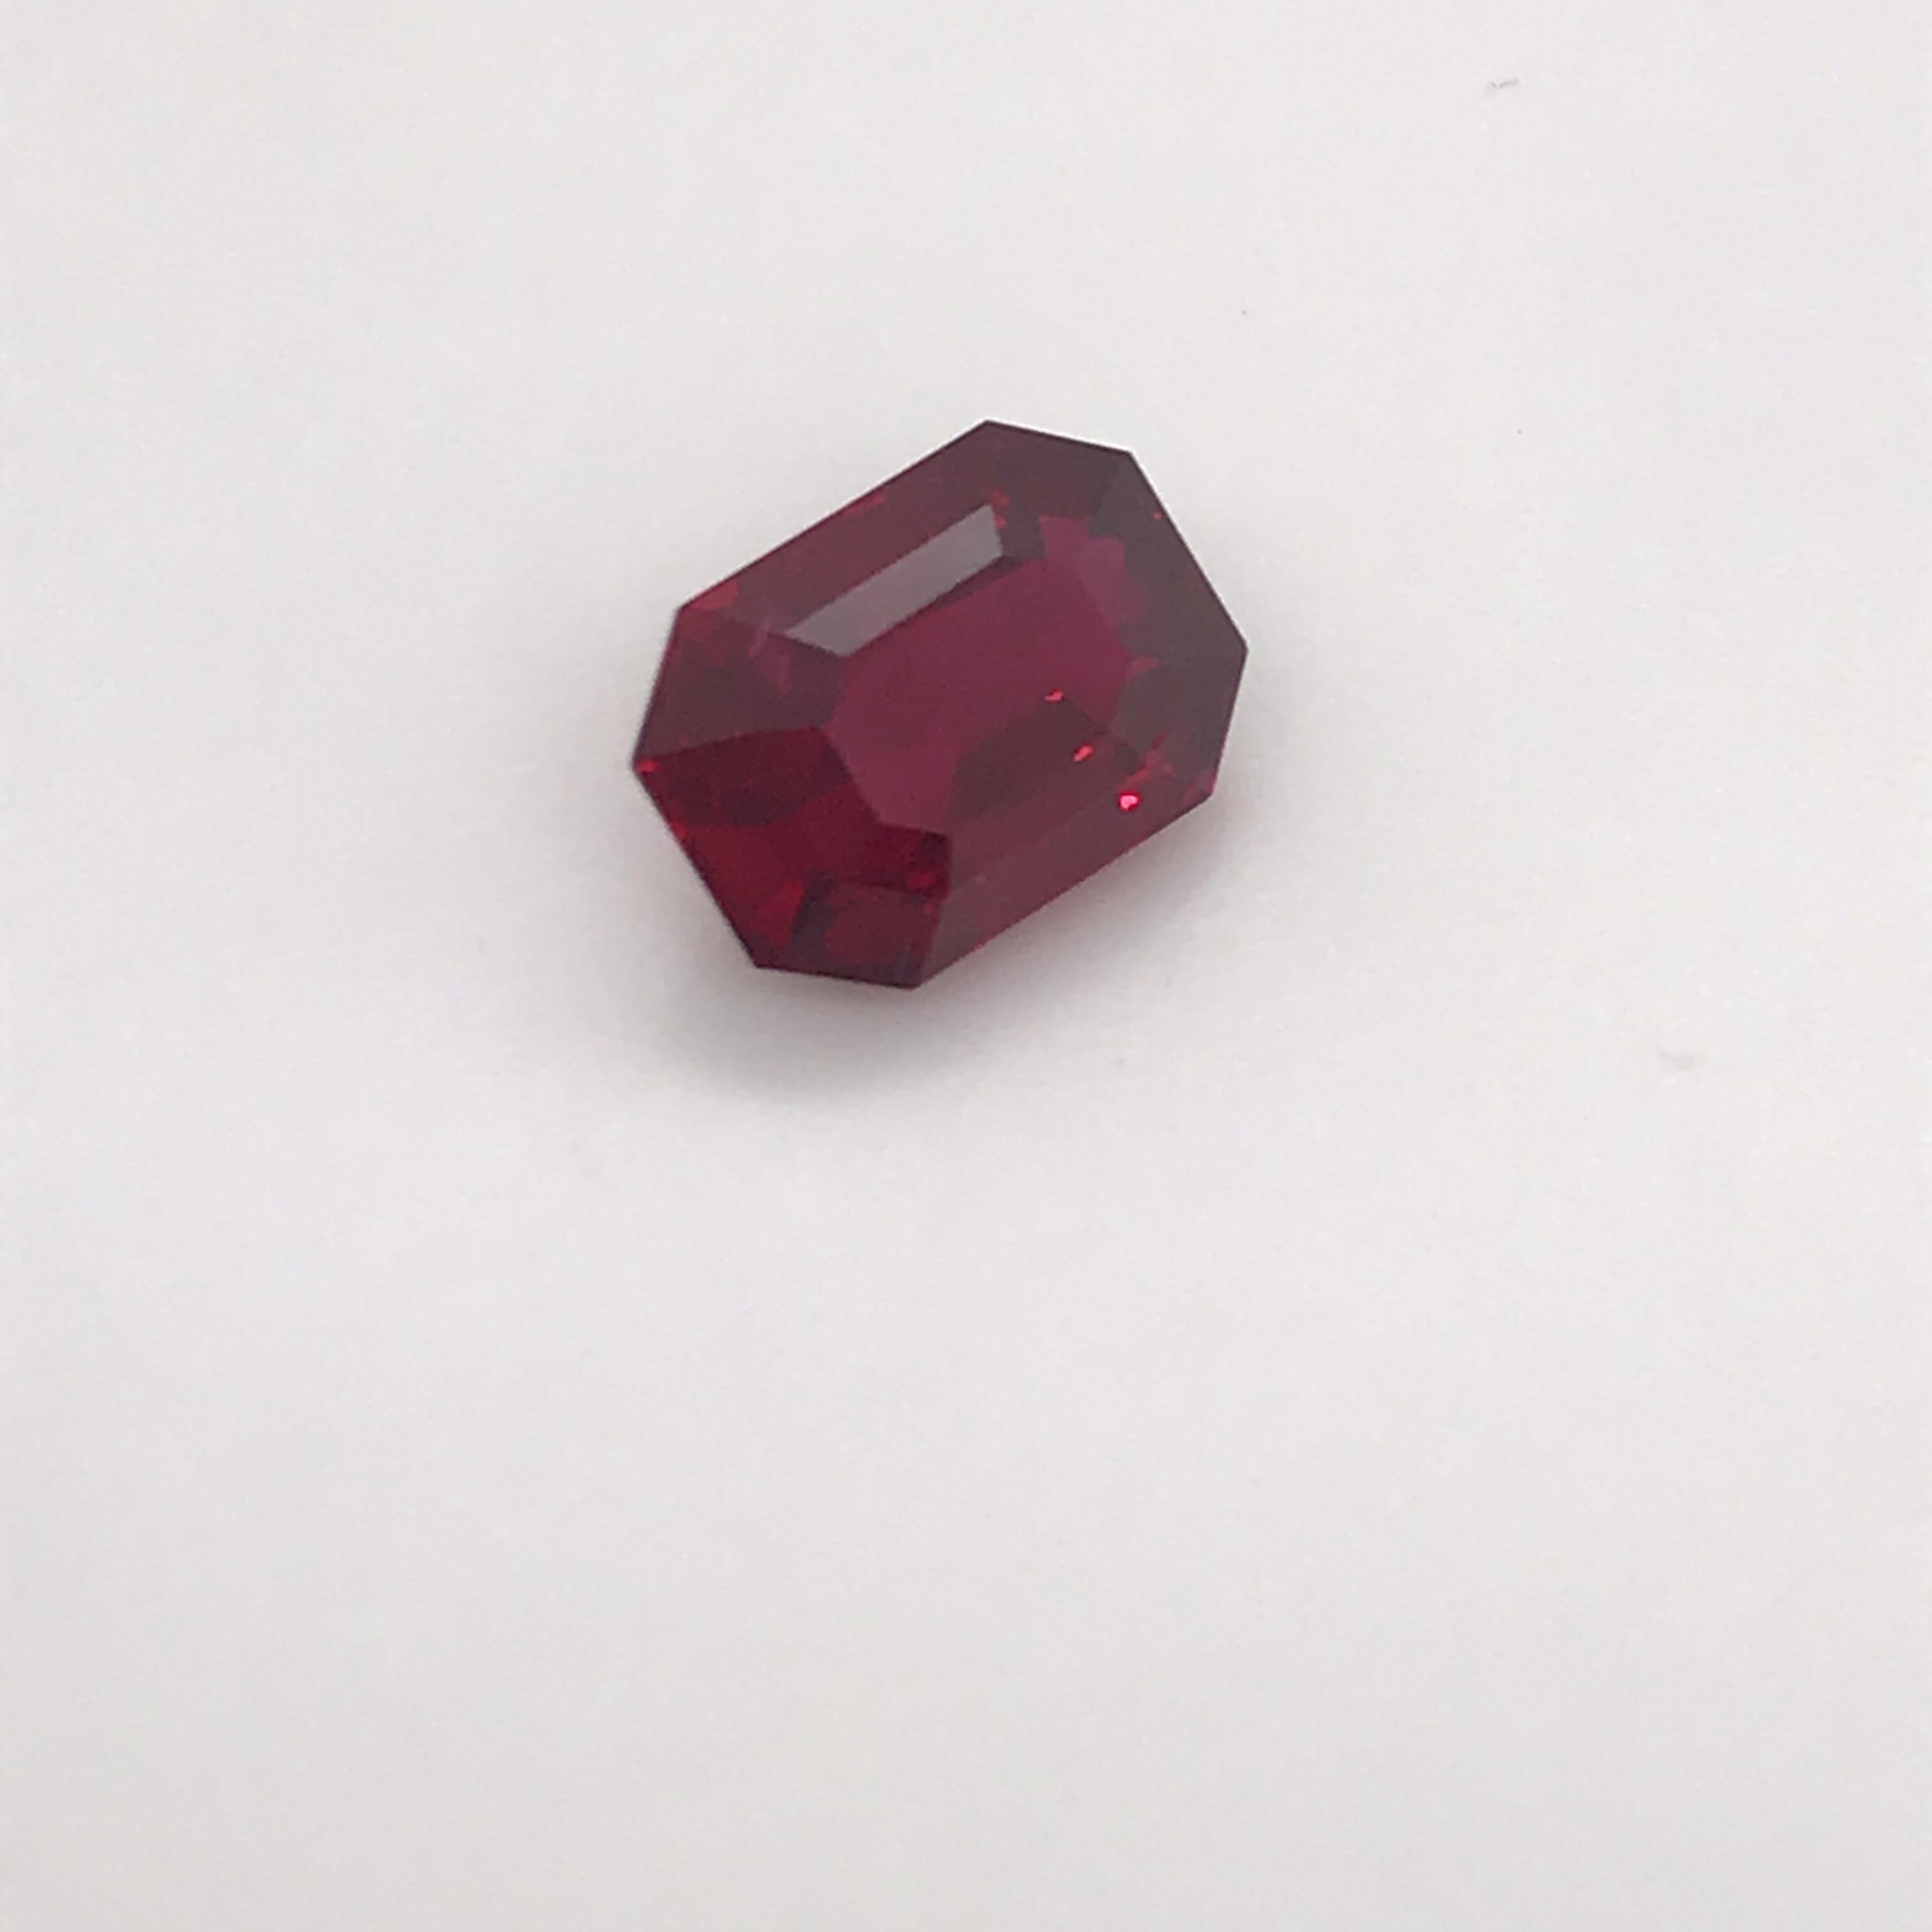 Contemporary Mozambique Natural Ruby Pigeon Blood 5.38 Carat